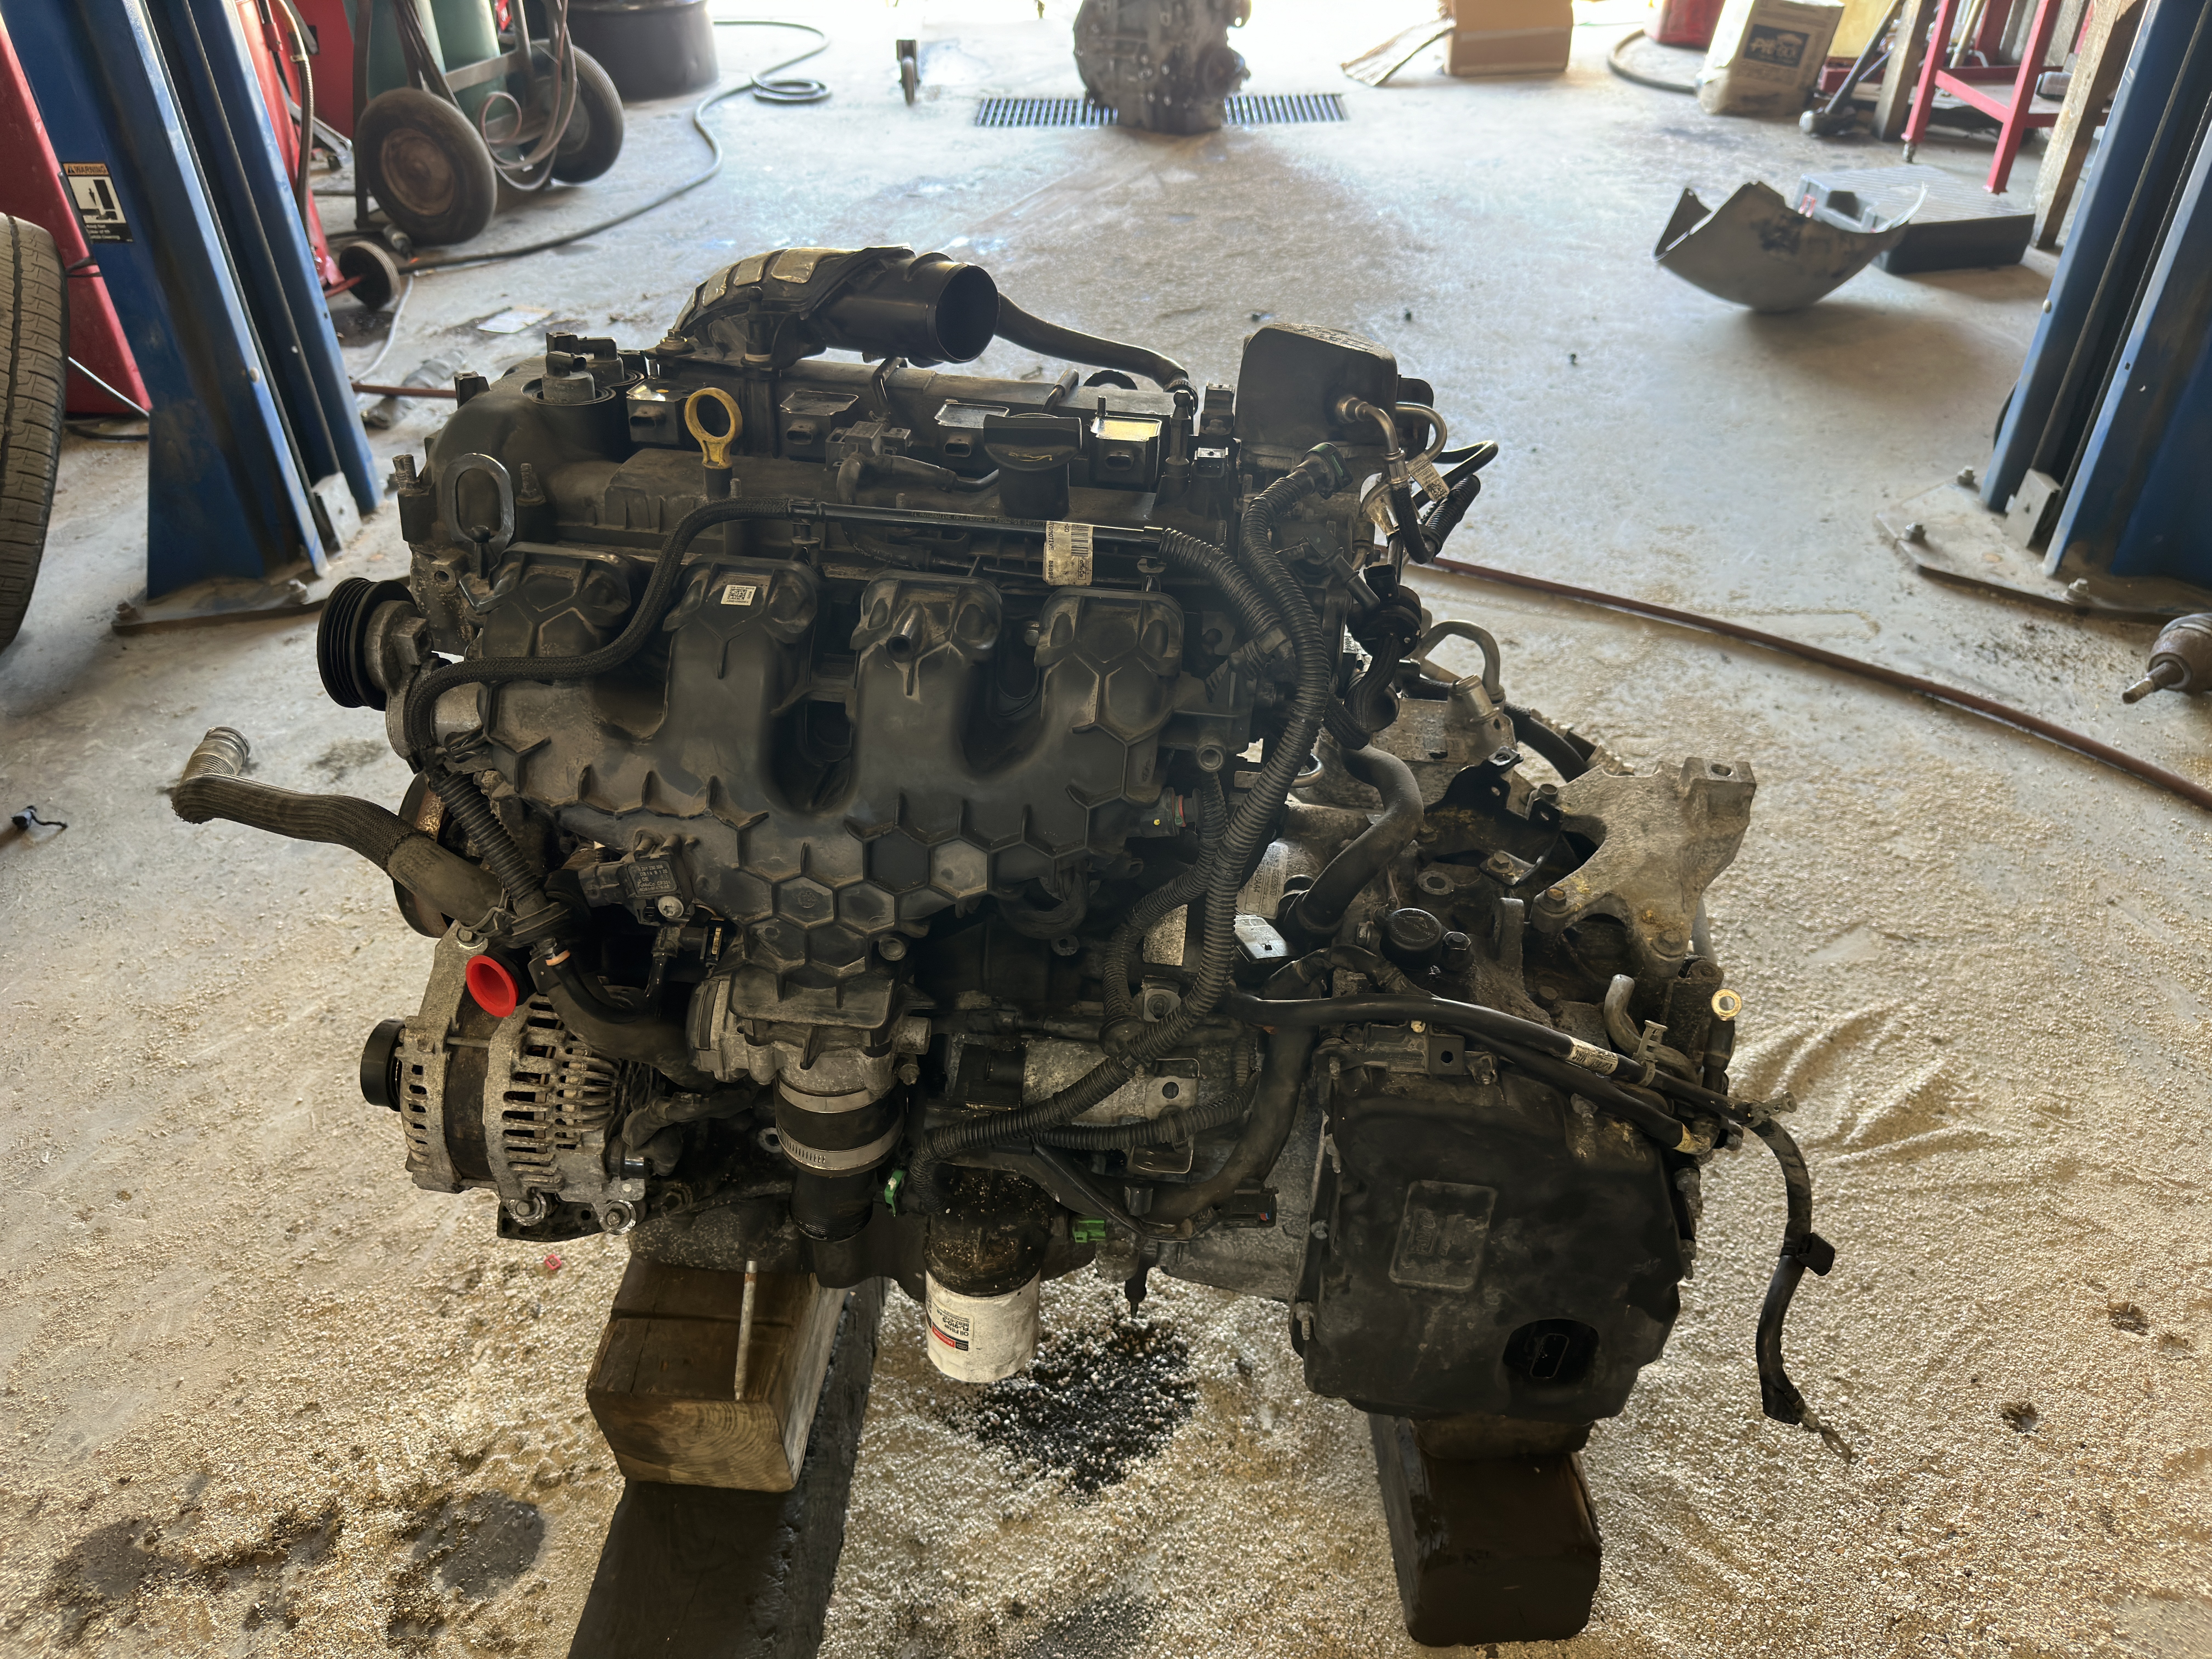 How Do I Know If My Engine Needs To Be Replaced